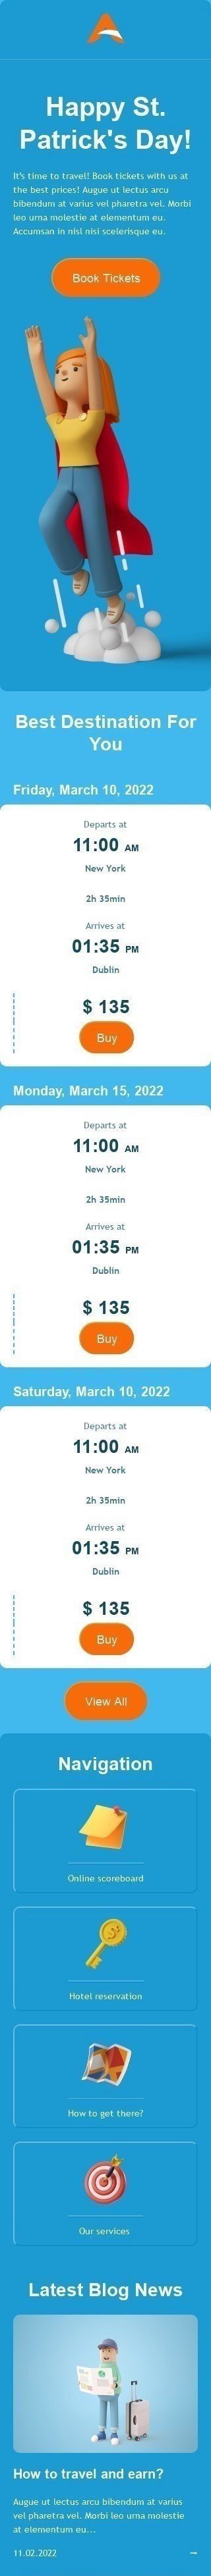 St. Patrick’s Day Email Template "Tickets to Dublin" for Airline industry mobile view